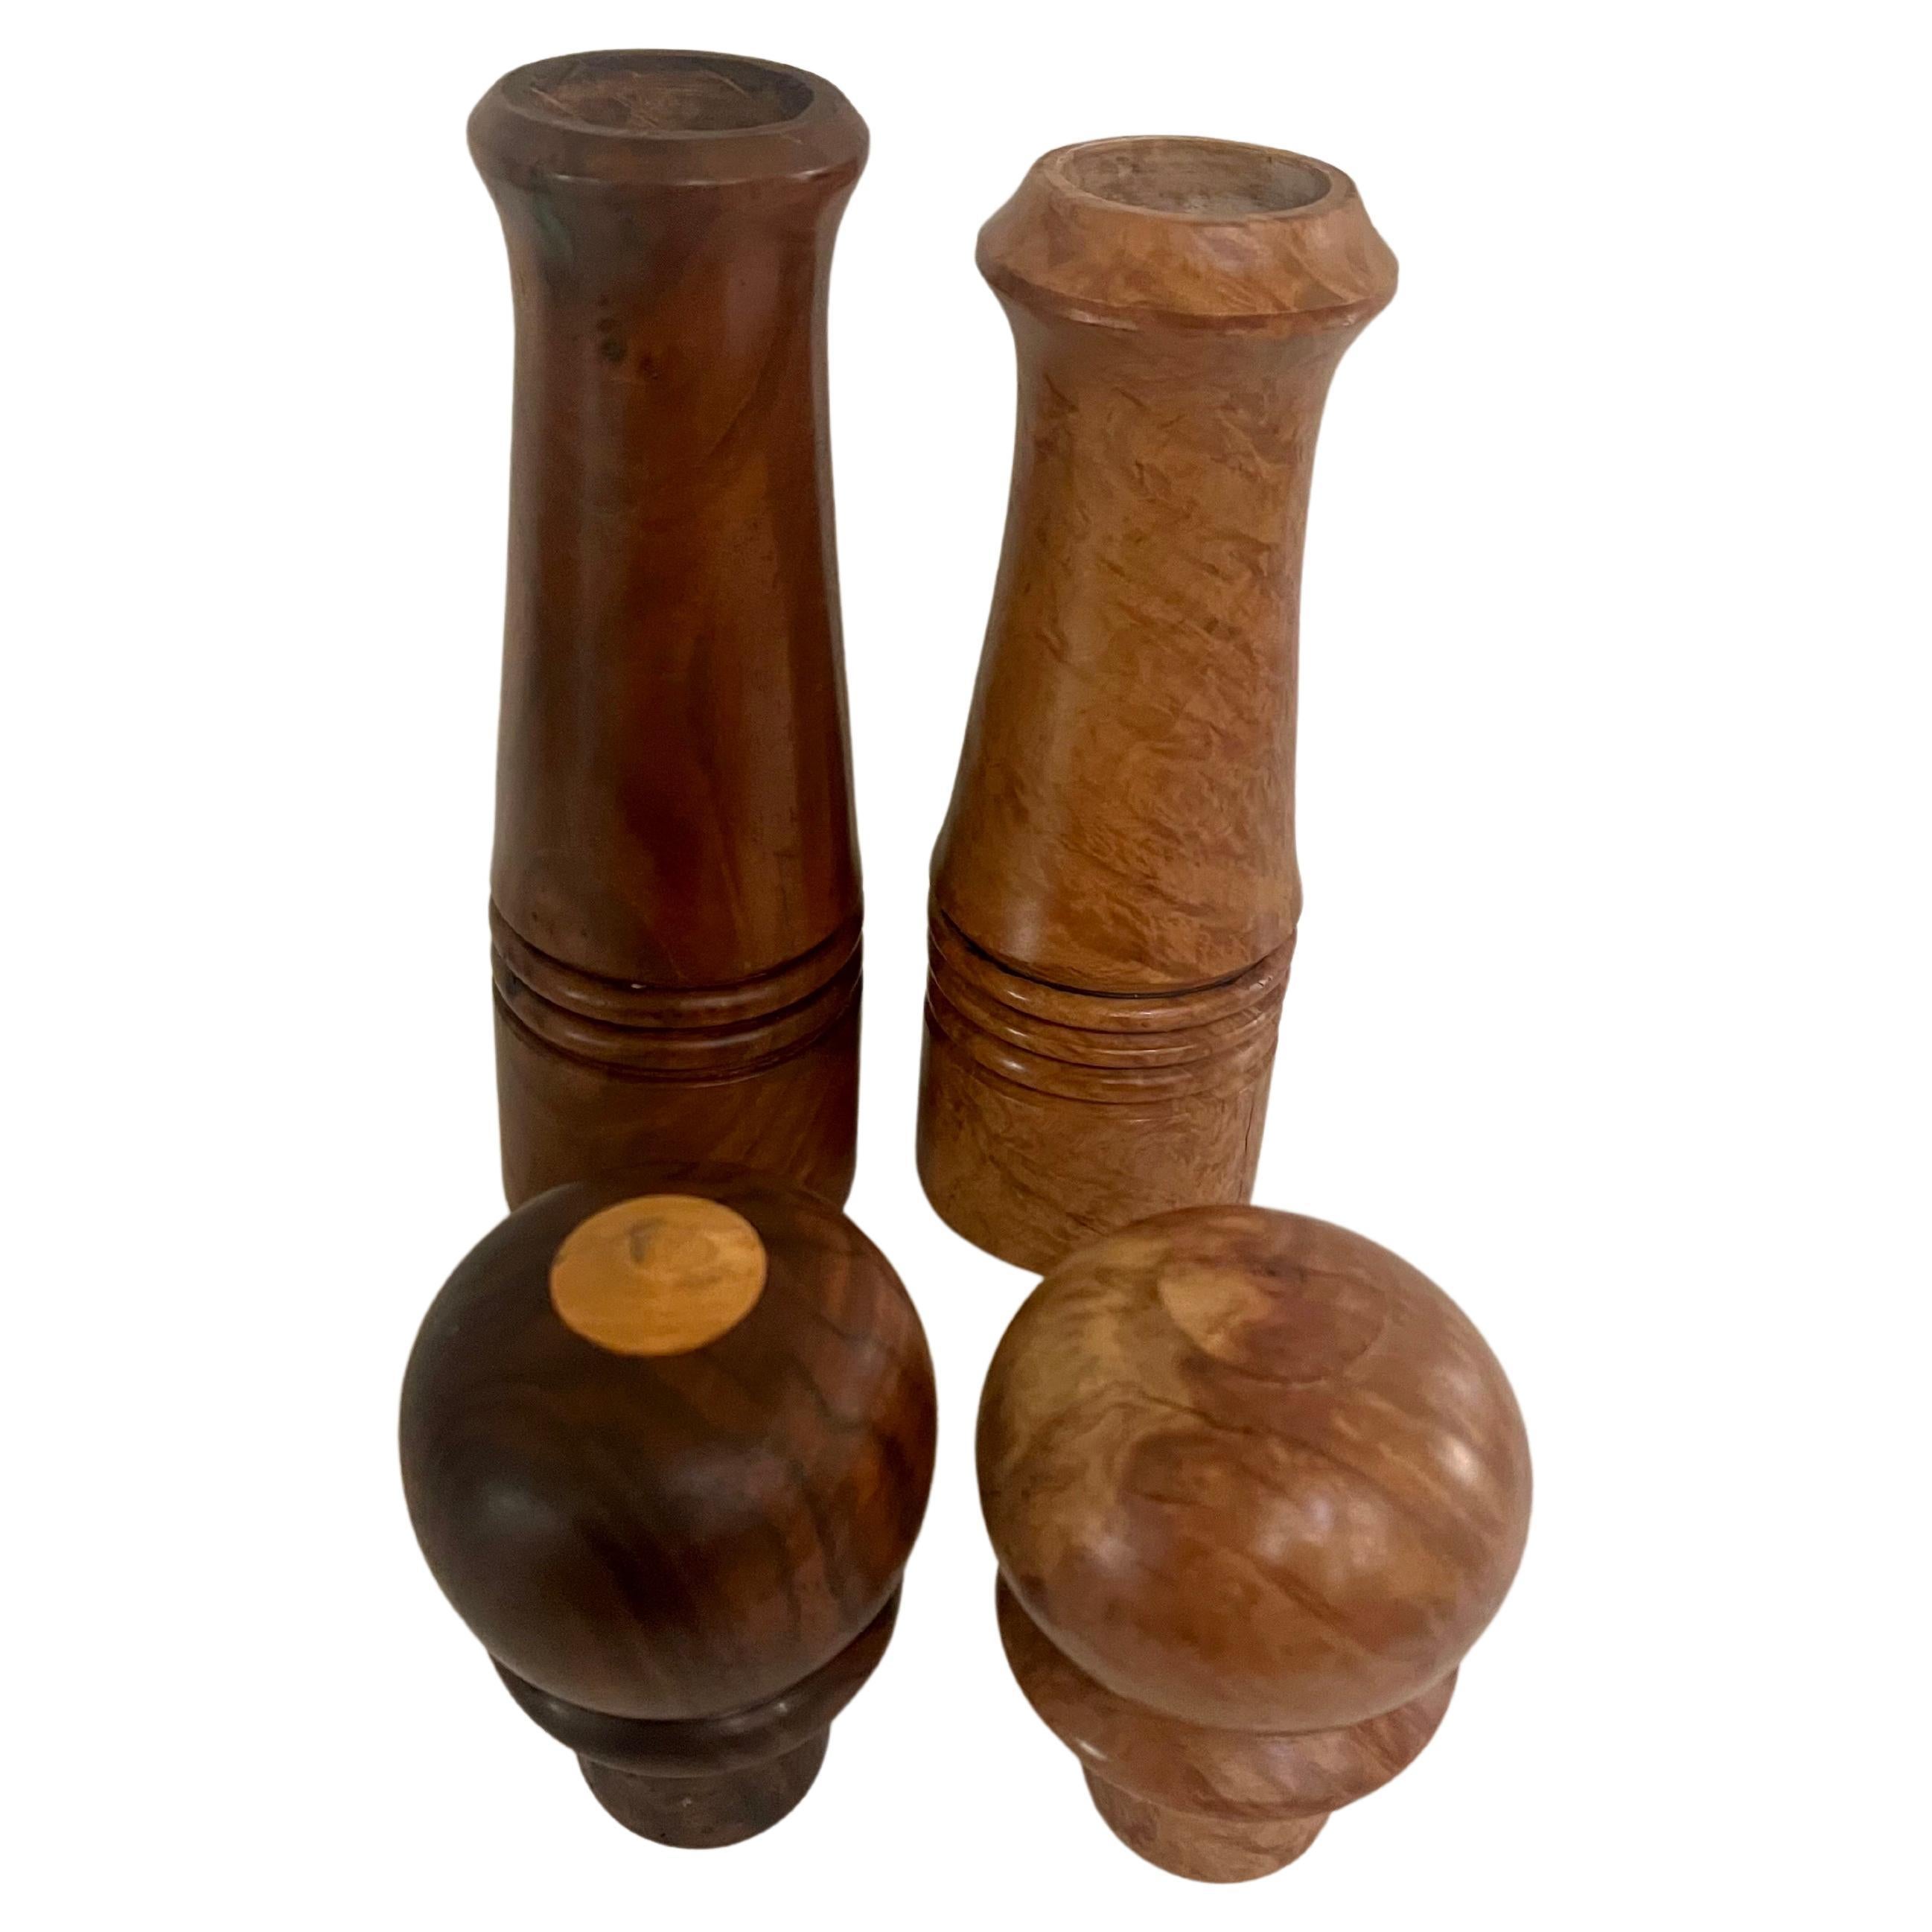 Beautiful hand crafted salt & Pepper grinder set signed in solid walnut and burl beautiful finish and condition great lines and design , circa 1980's .